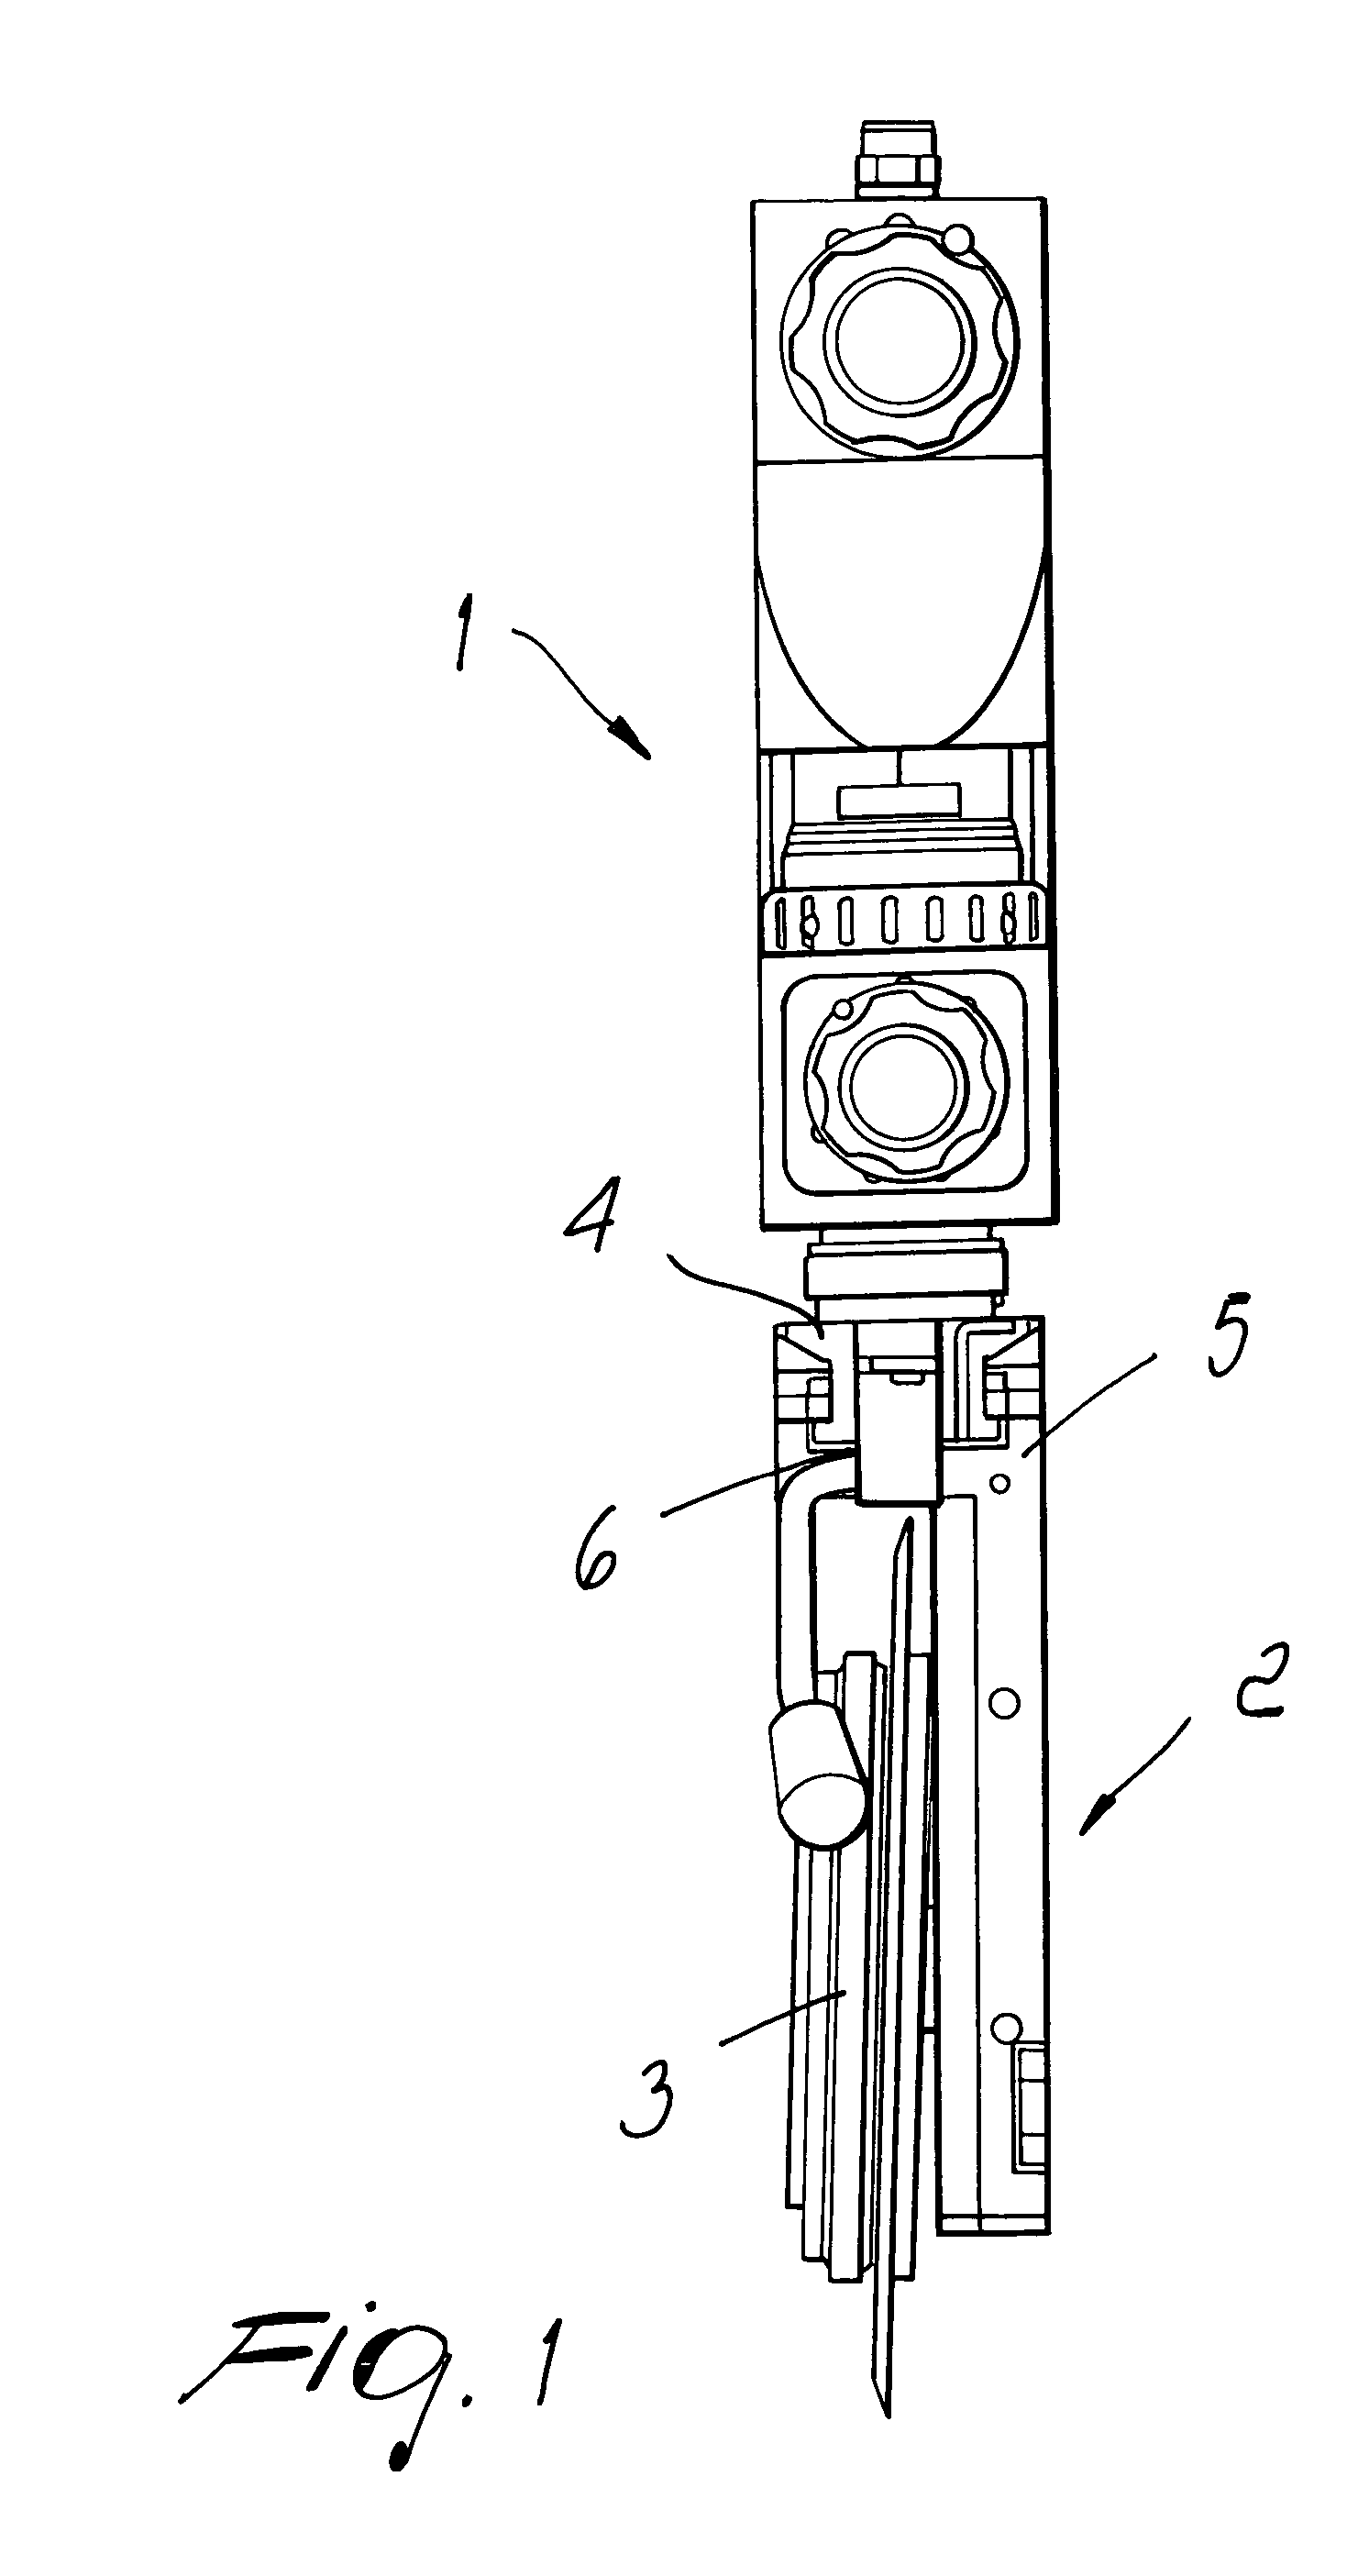 Coupling of the cartridge of a cutter holder for industrial cutting